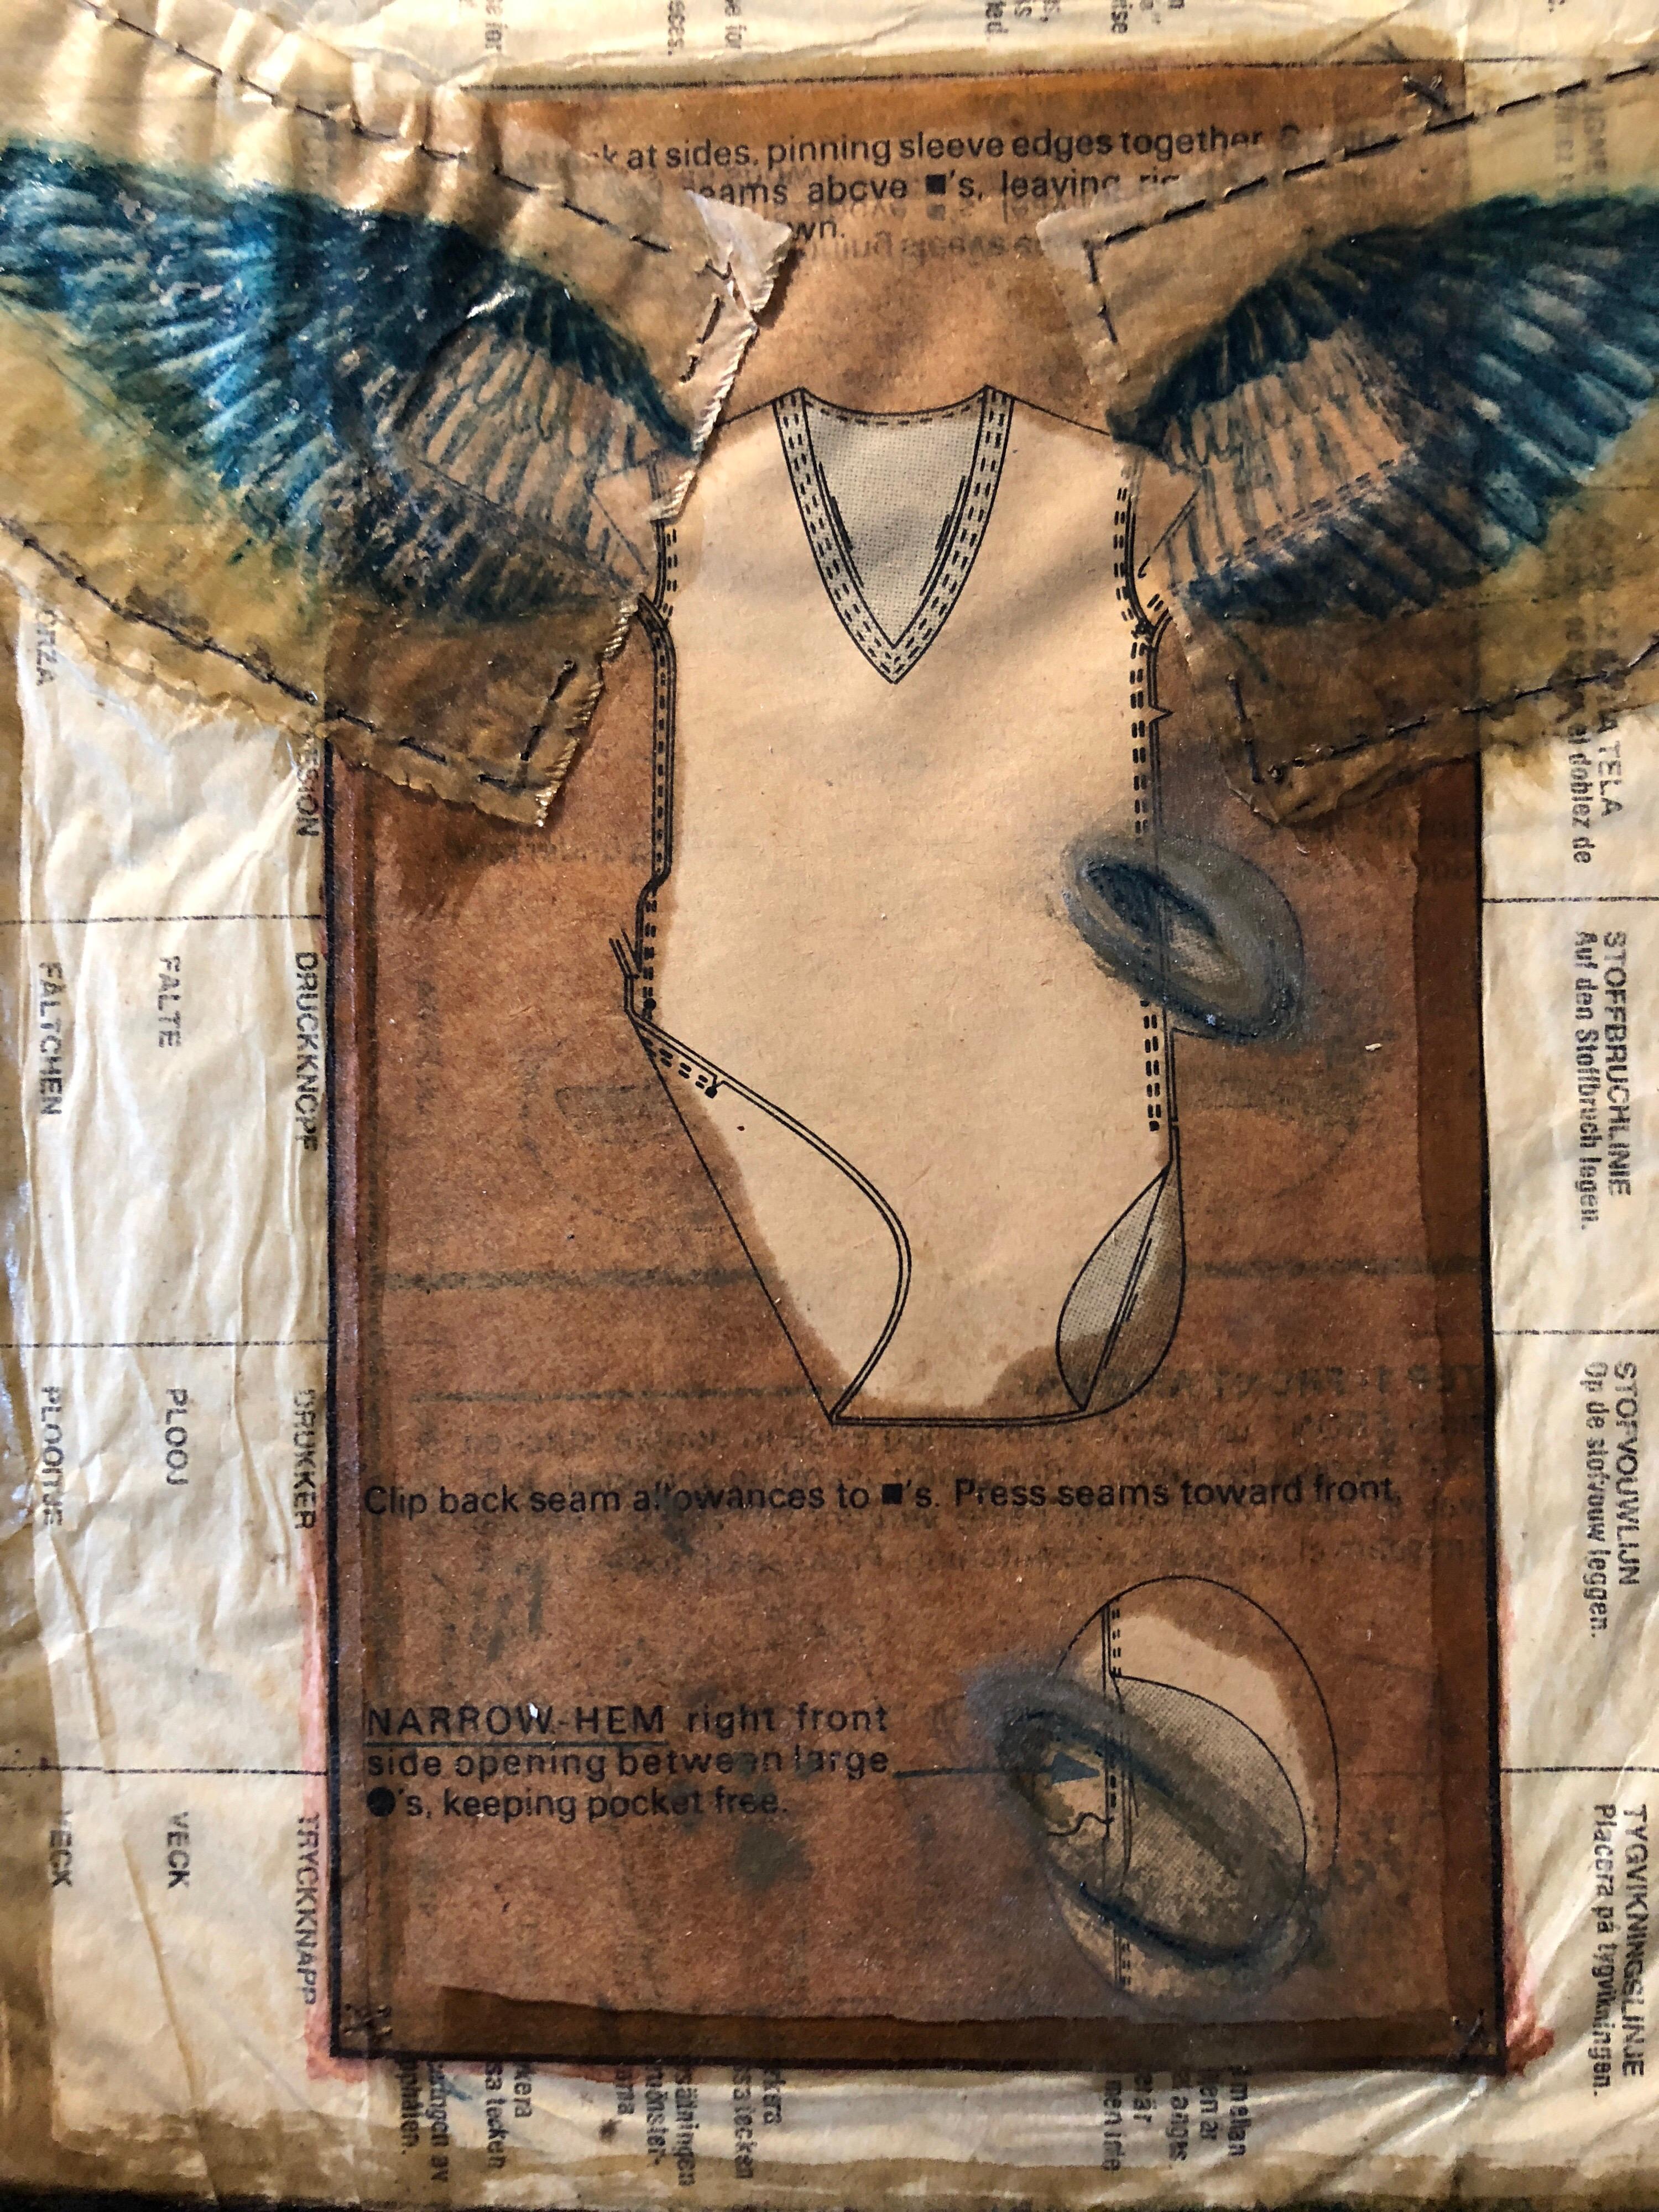 Angel Wings Mixed Media Collage Painting Assemblage Piece Stitched and Sewn - Modern Mixed Media Art by Unknown